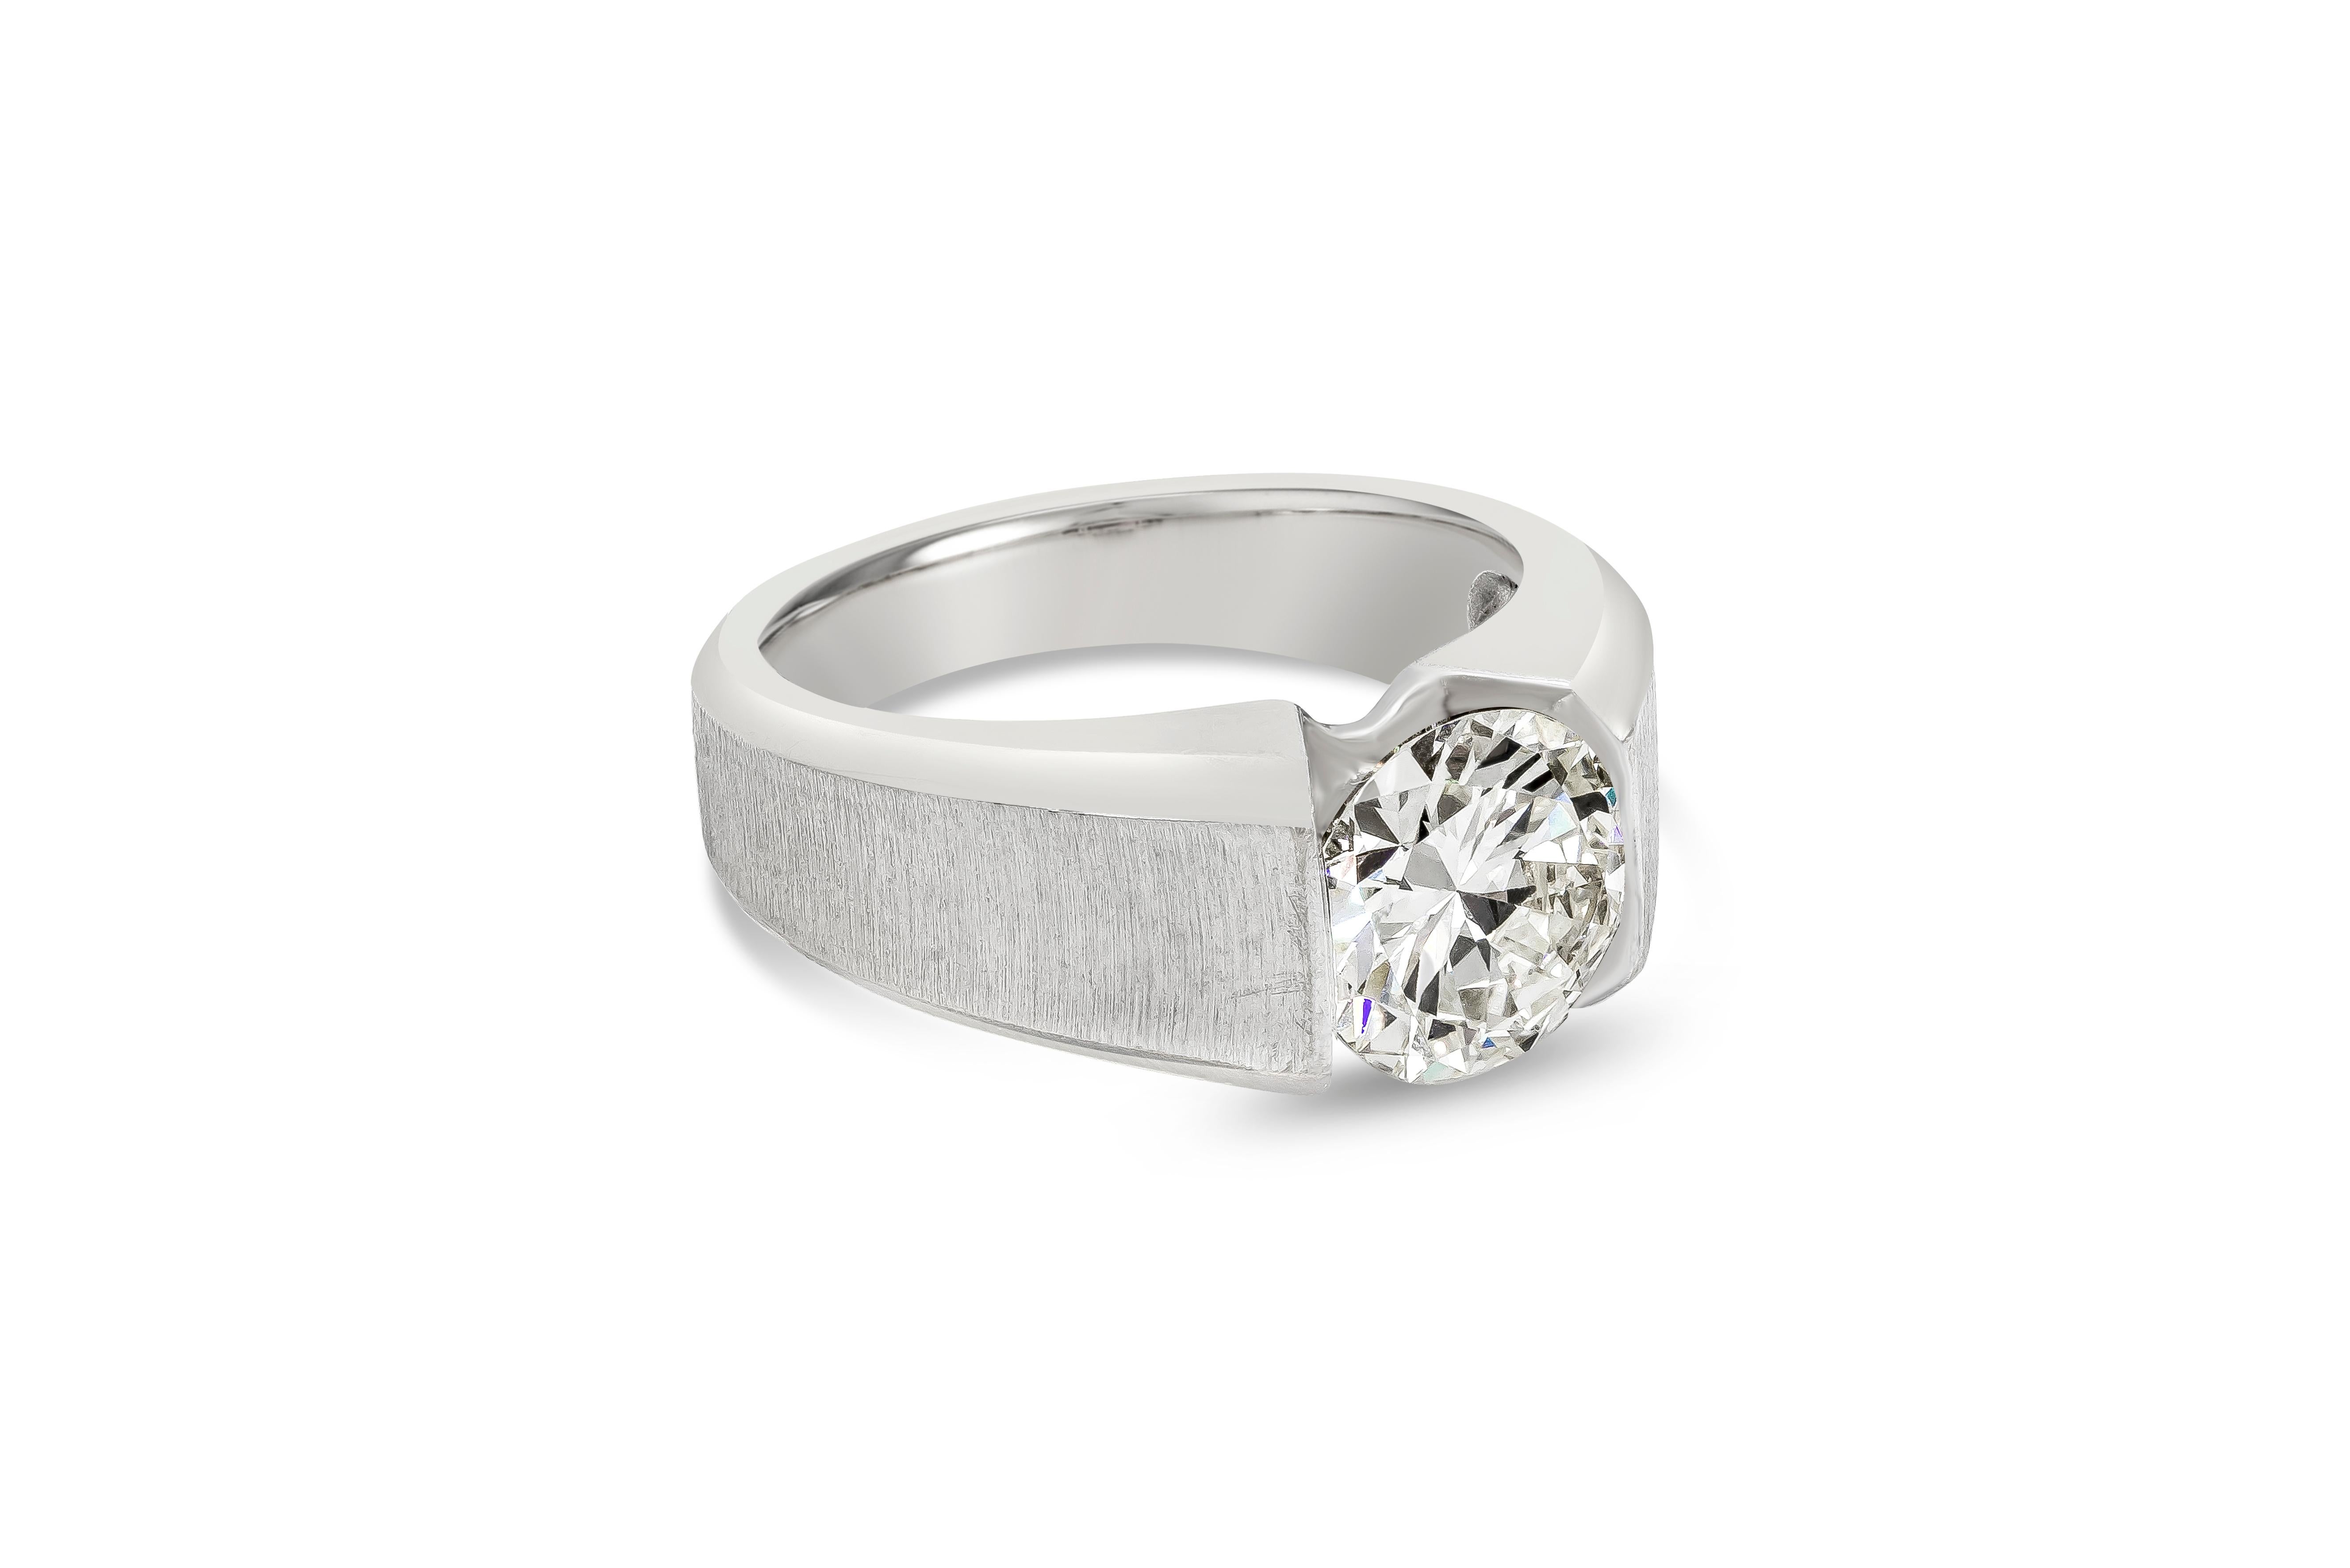 A beautiful men's ring showcasing a 2.49 carat round brilliant diamond certified by GIA as M color, VS1 clarity. Set in a semi-bezel angular setting with a matte finish. Made in platinum. Size 9

Style available in different price ranges. Prices are